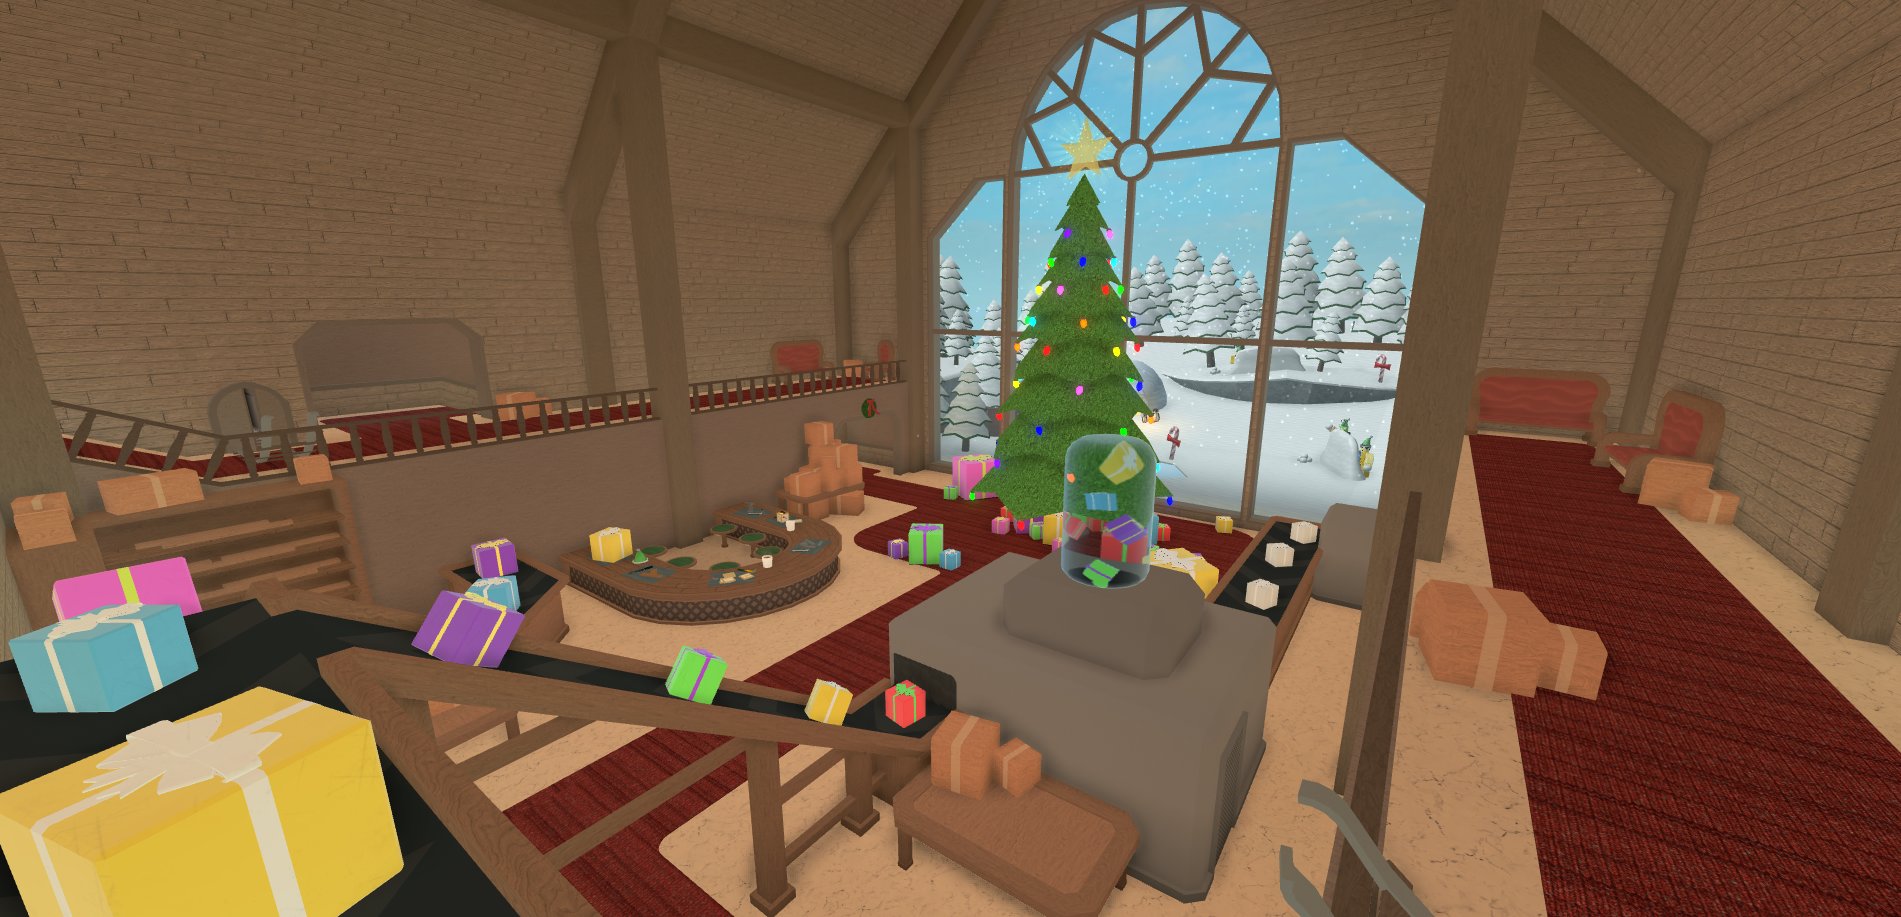 Zyleak Quinn The Murder Mystery 2 Christmas Event Is Out What Do You Think Of The New Limited Time Workshop Map Play It Here T Co Suy56gtjsm Nikilisrbx Roblox